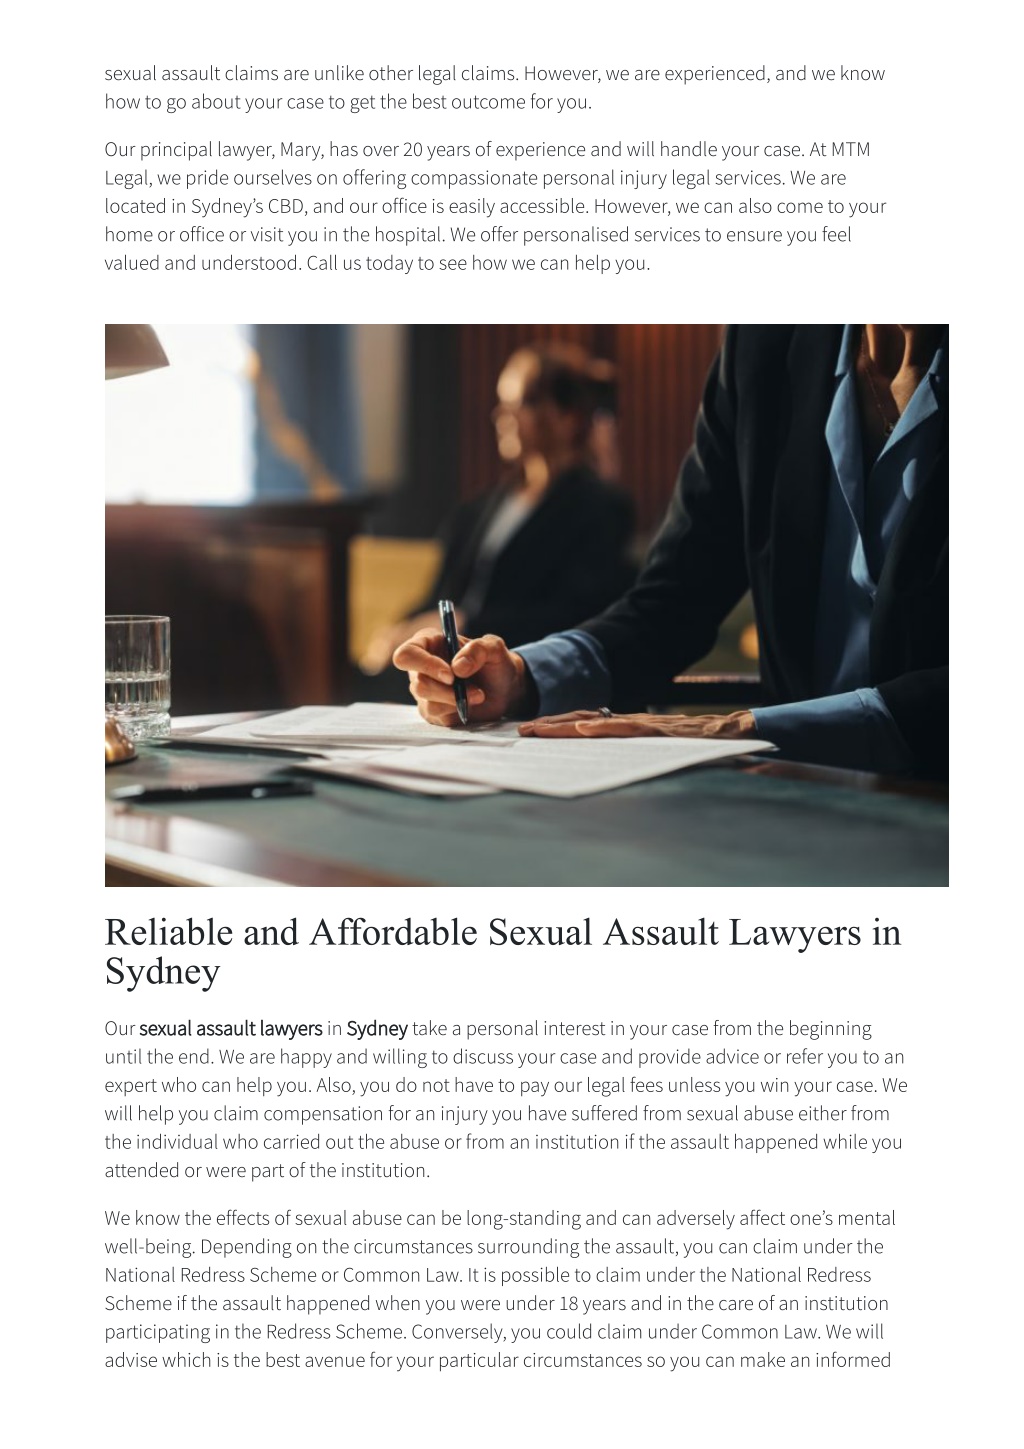 Ppt Sexual Assault Lawyers Sydney Powerpoint Presentation Free Download Id11697821 4317